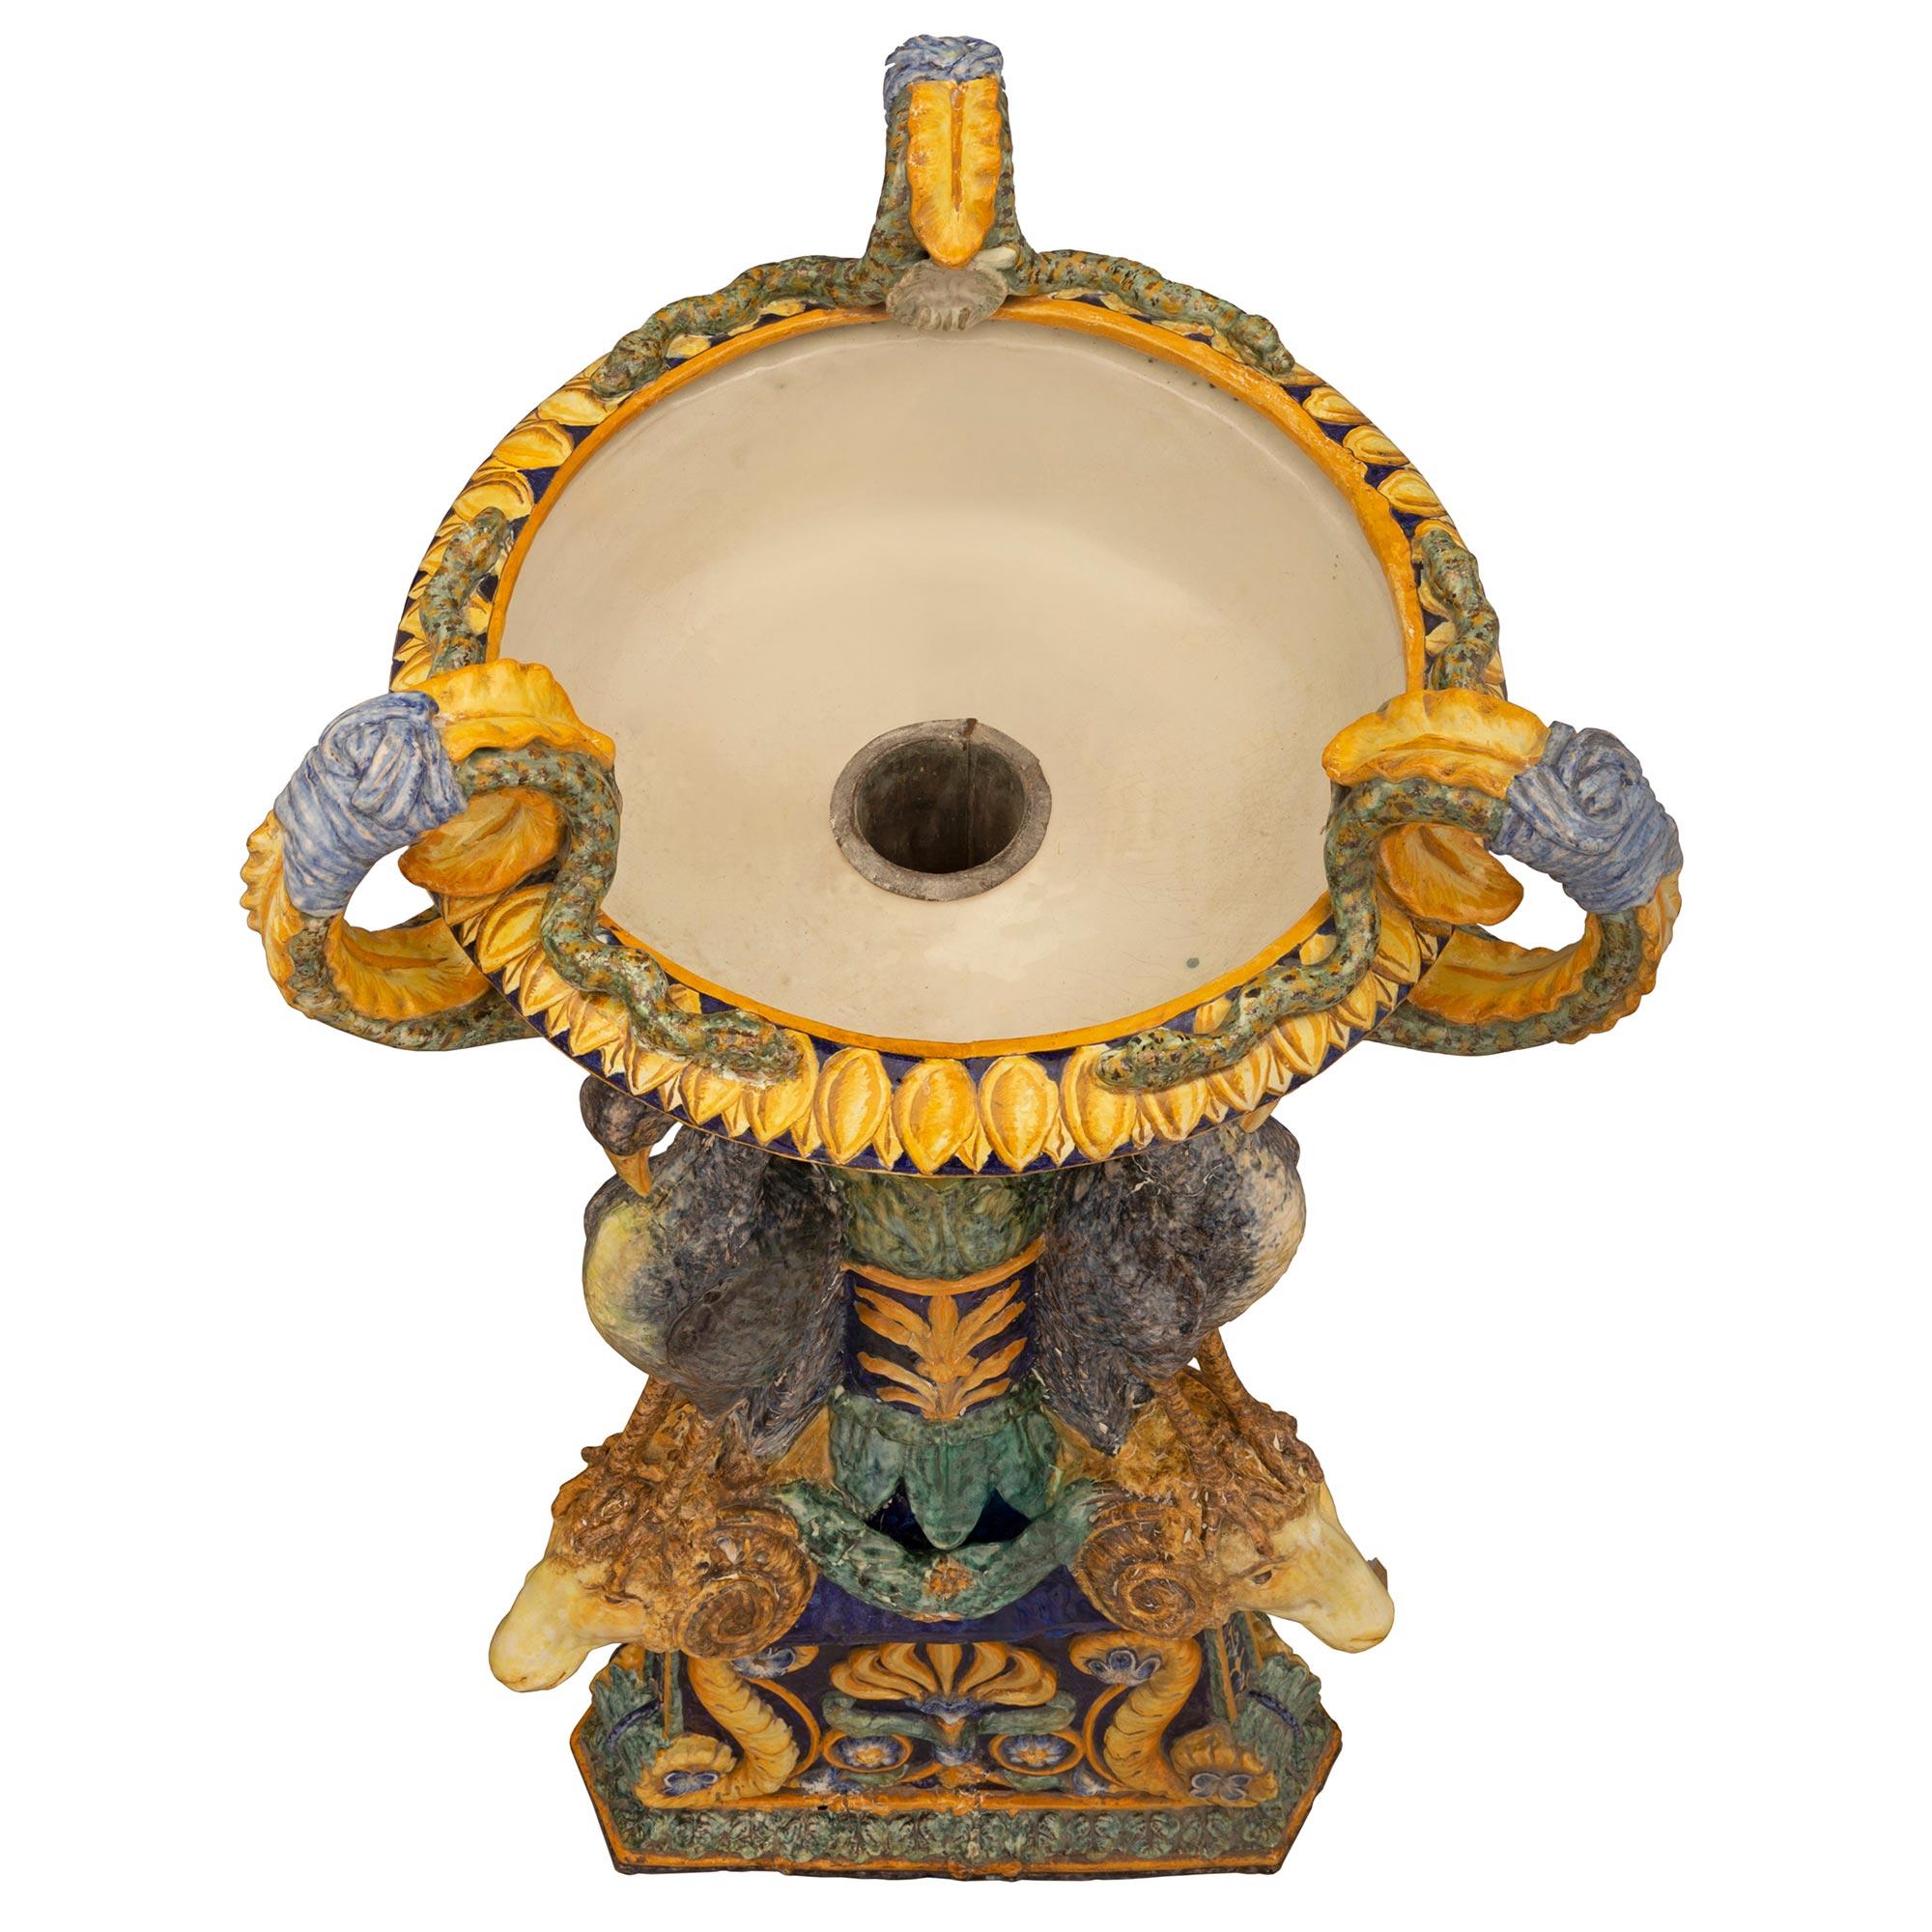 A sensational and rare Italian 19th century three-piece Majolica planter. The large-scale planter is raised by a triangular pedestal base with cut corners and decorated with a striking central palmette flanked by rich large scrolls. The central